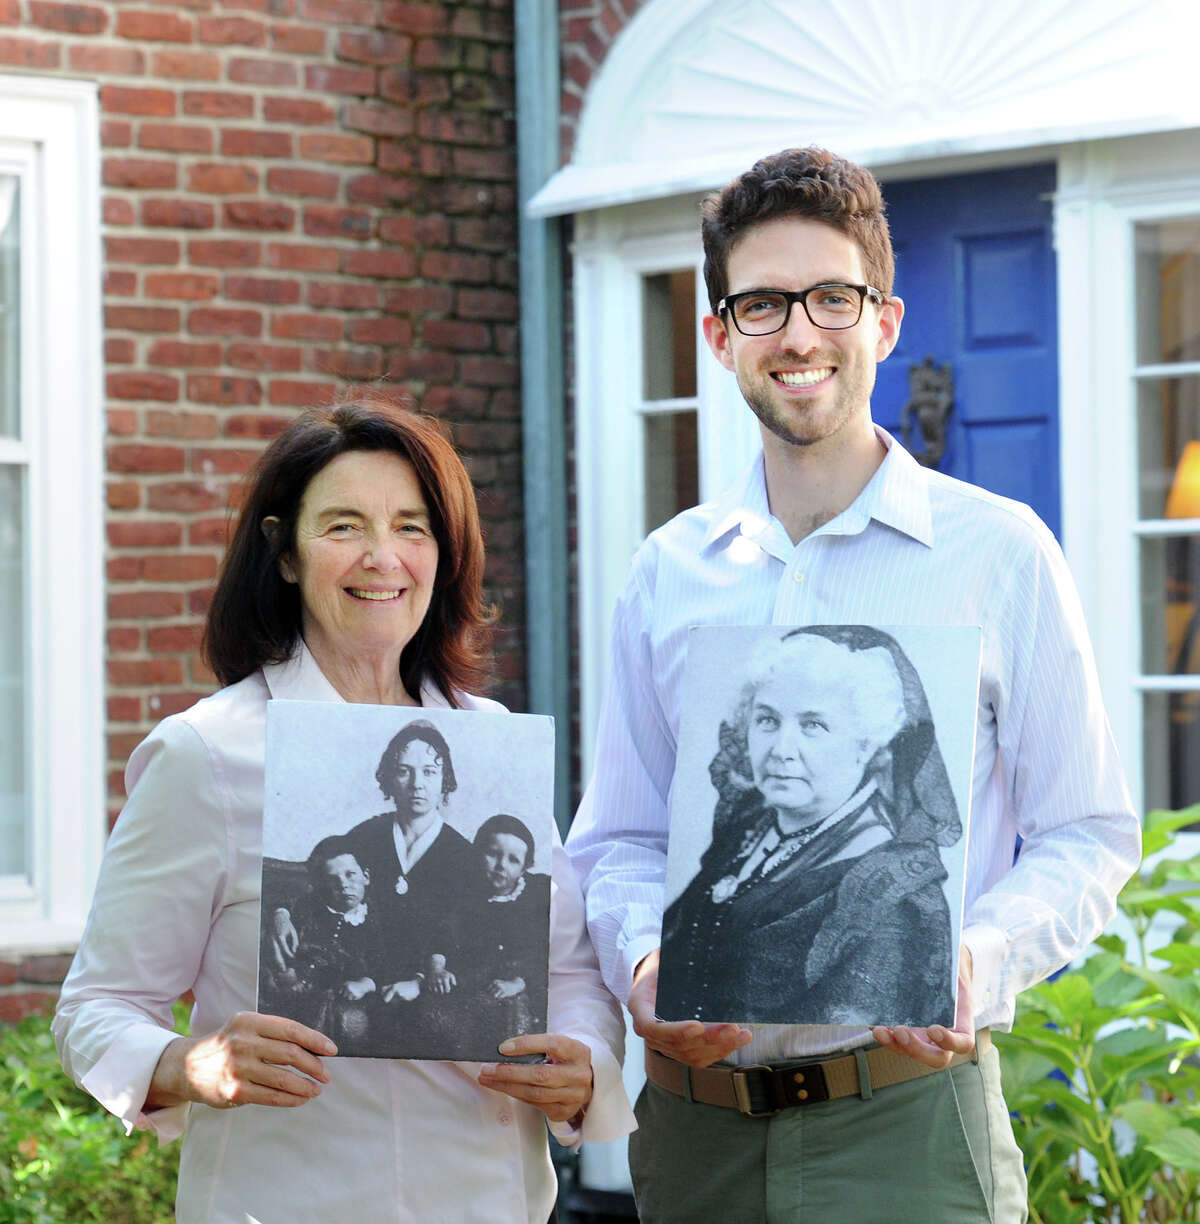 At left, Coline Jenkins, the great-great-granddaughter of Elizabeth Cady Stanton, and her son, Eric Jenkins-Sahlin, hold photos of Stanton, leader of the women’s suffrage movement, at their home in Greenwich, Conn., Thursday, Oct. 6, 2016. The Jenkins home was built in the 1930s by the state’s first female civil engineer, Nora Stanton Blatch Barney, Coline’s grandmother.